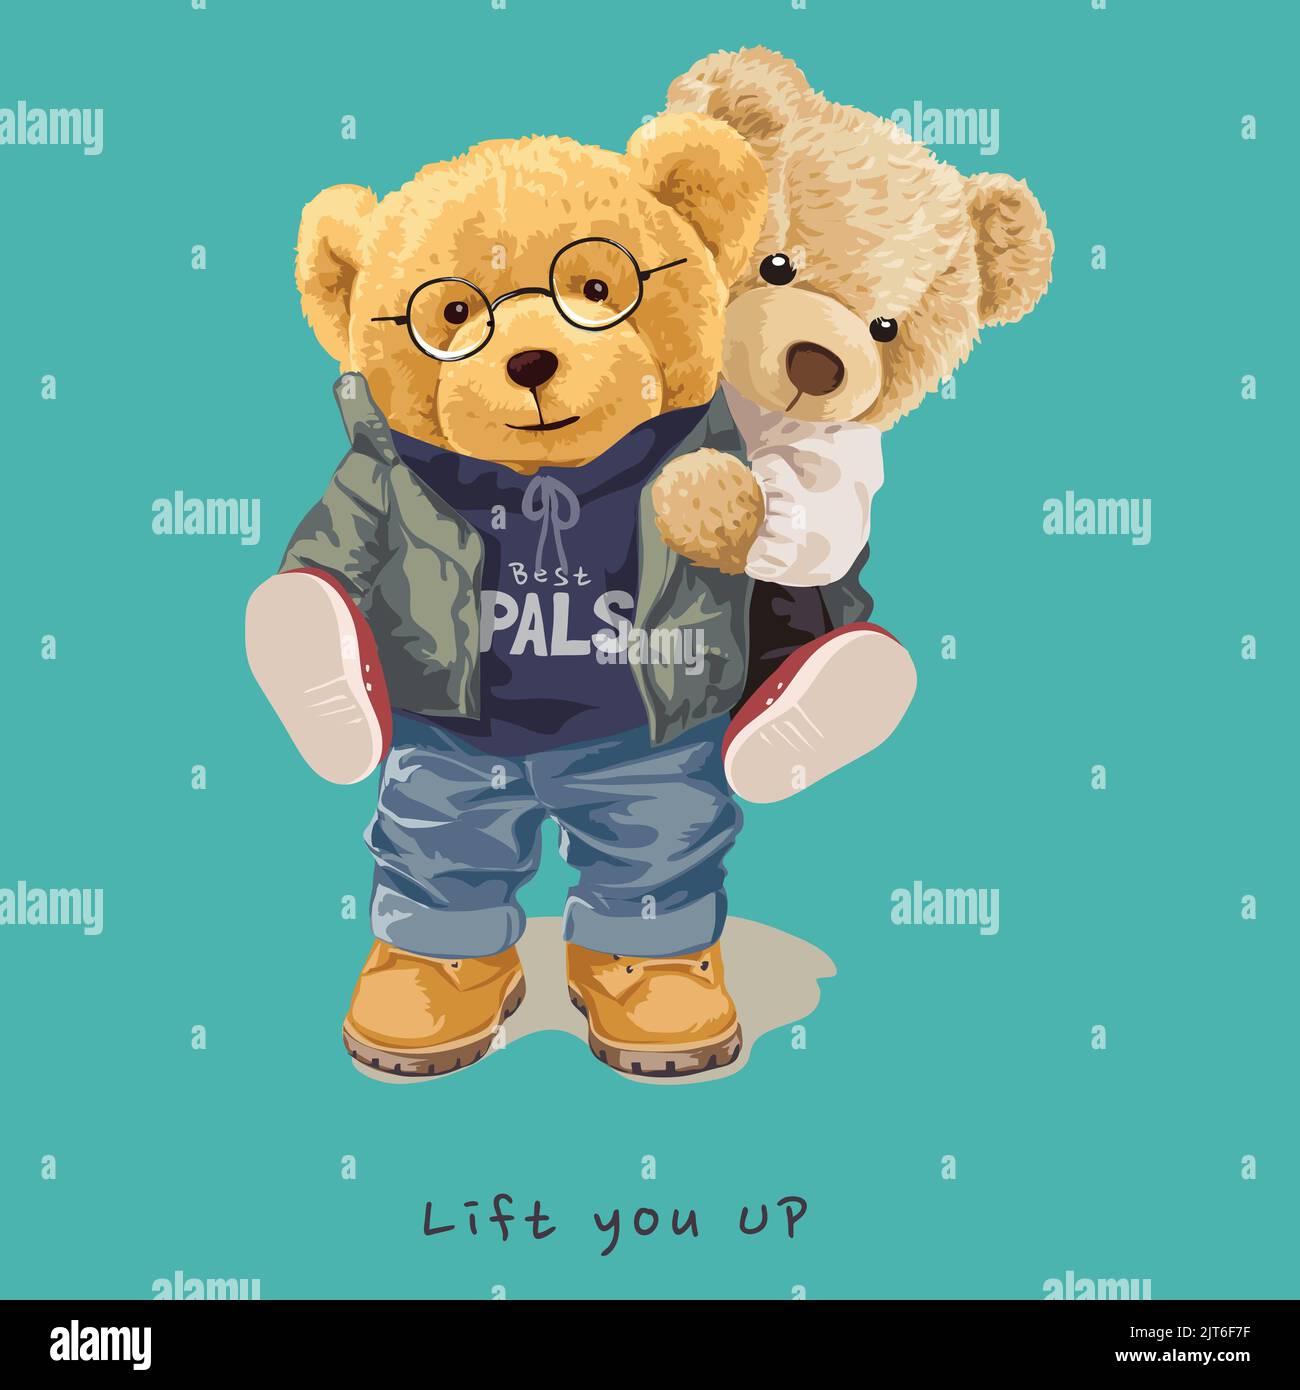 lift you up slogan with bear doll carrying a friend on back illustration Stock Vector